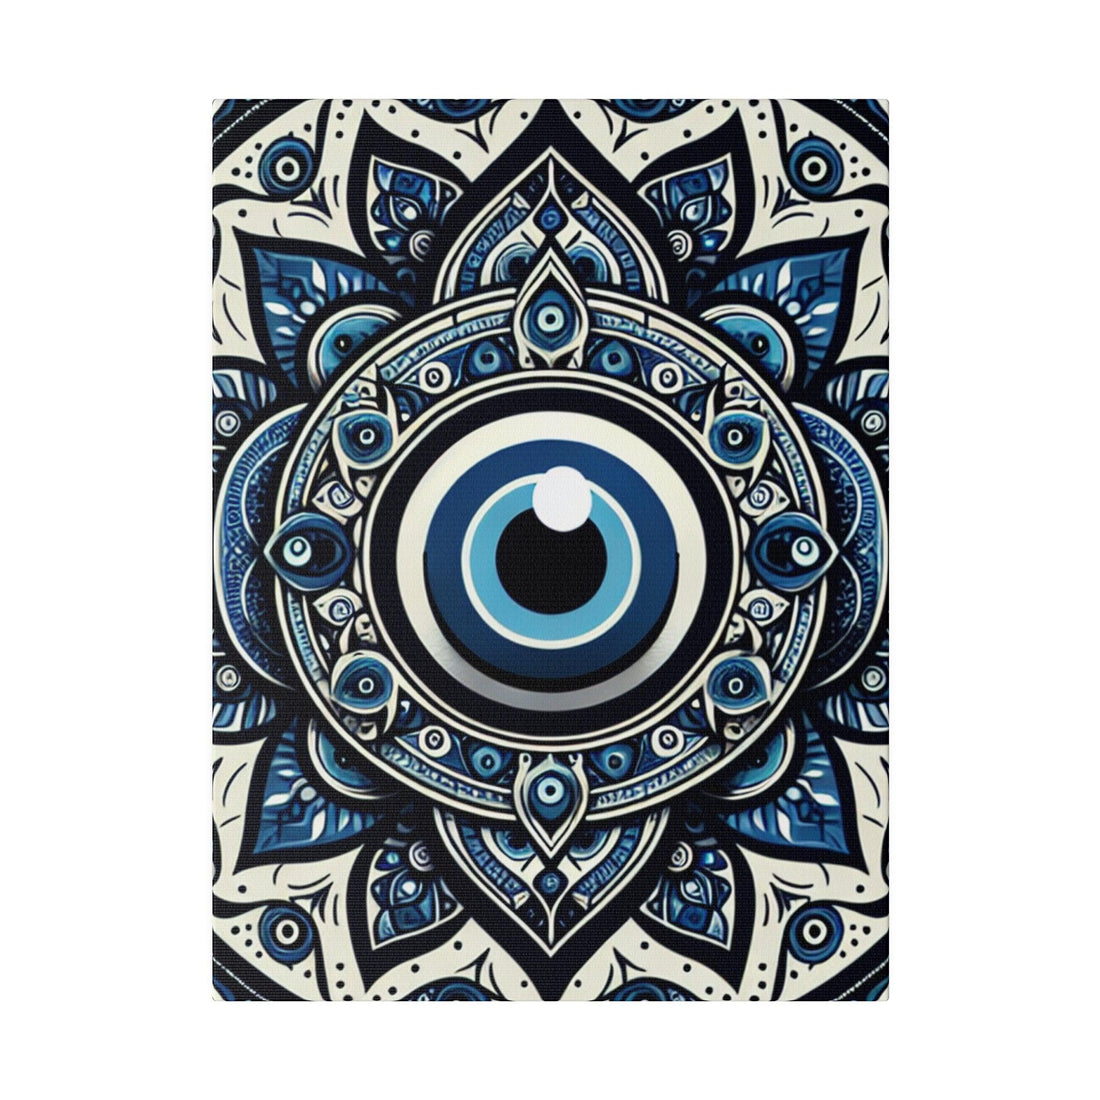 "Visual Chameleon: Evil Eye Hypnosis Canvas Wall Art" - Canvas - The Alice Gallery